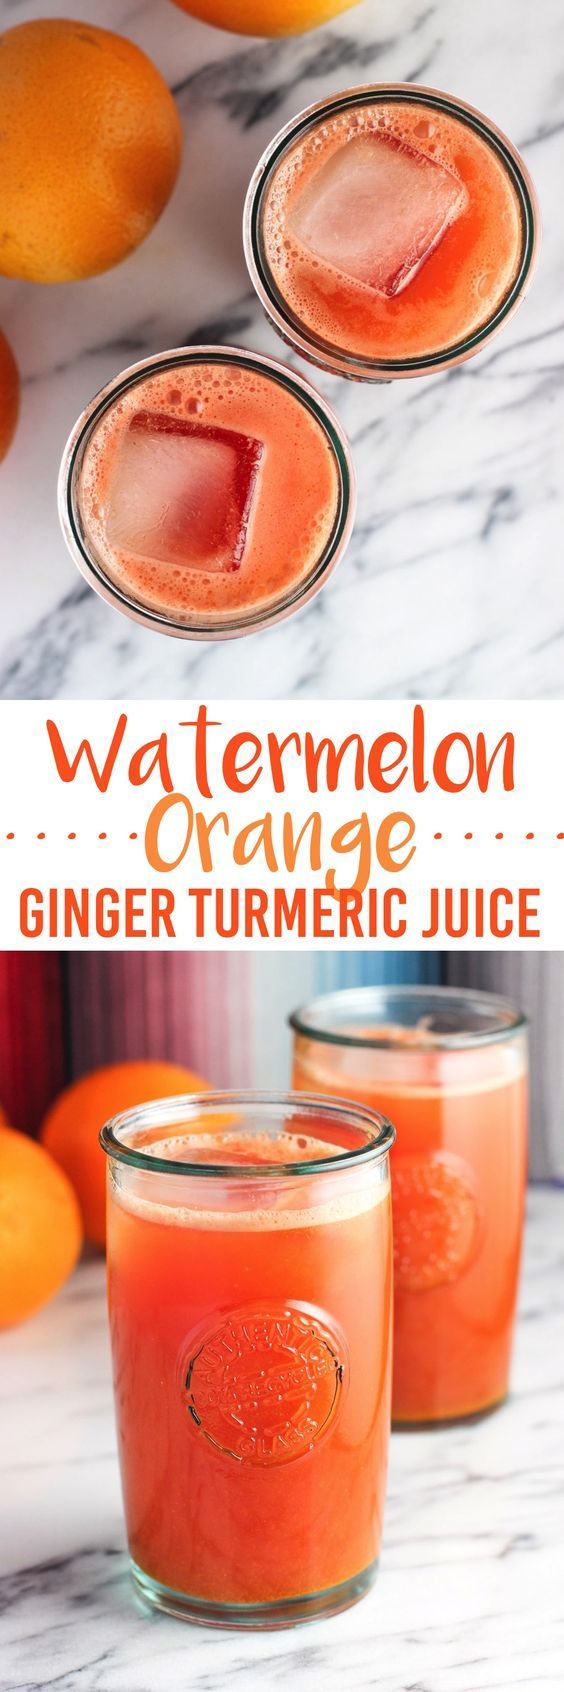 Watermelon orange ginger turmeric juice is a frothy, refreshing juice spiced up with superfoods! This juice is smooth with no